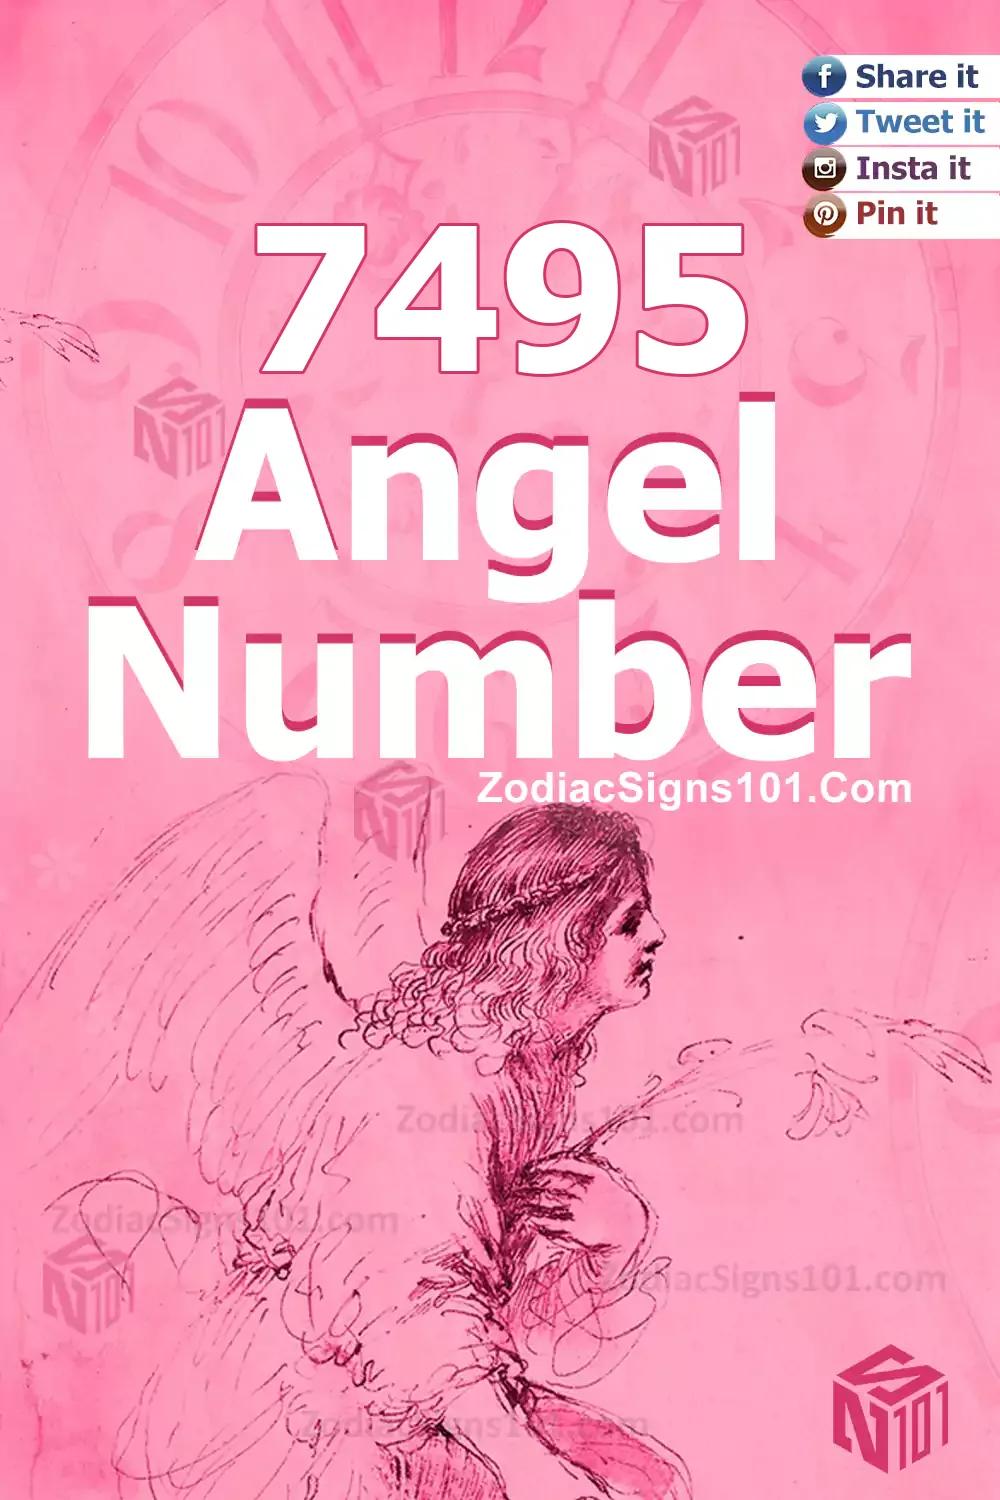 7495 Angel Number Meaning